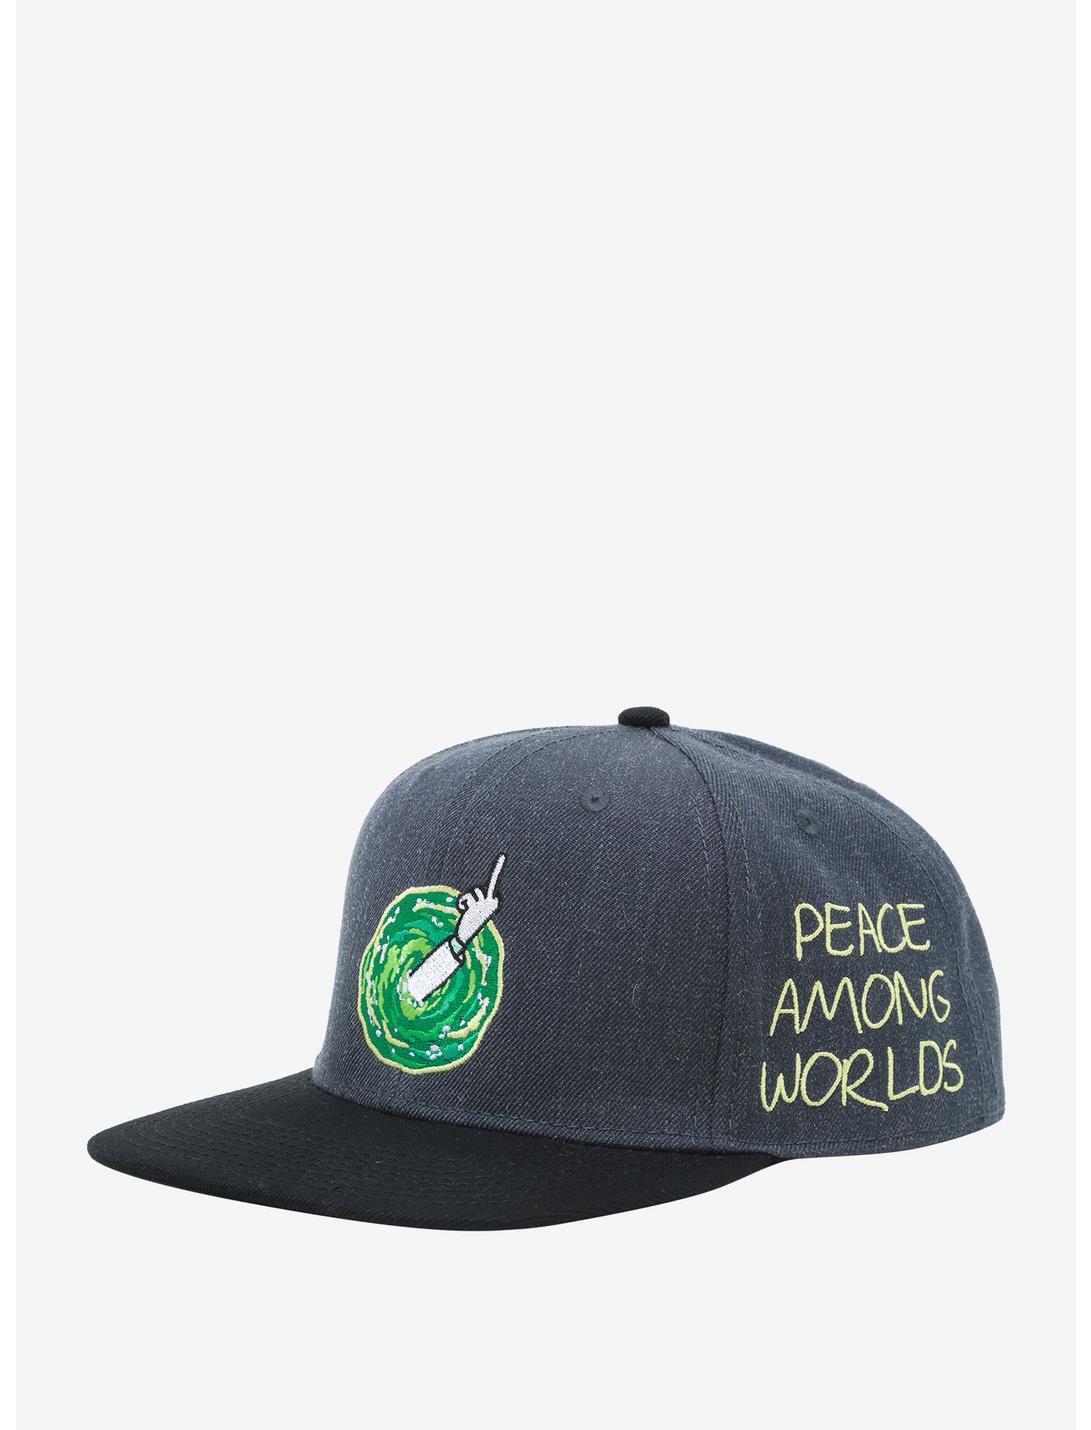 Rick And Morty Peace Among Worlds Snapback Hat, , hi-res